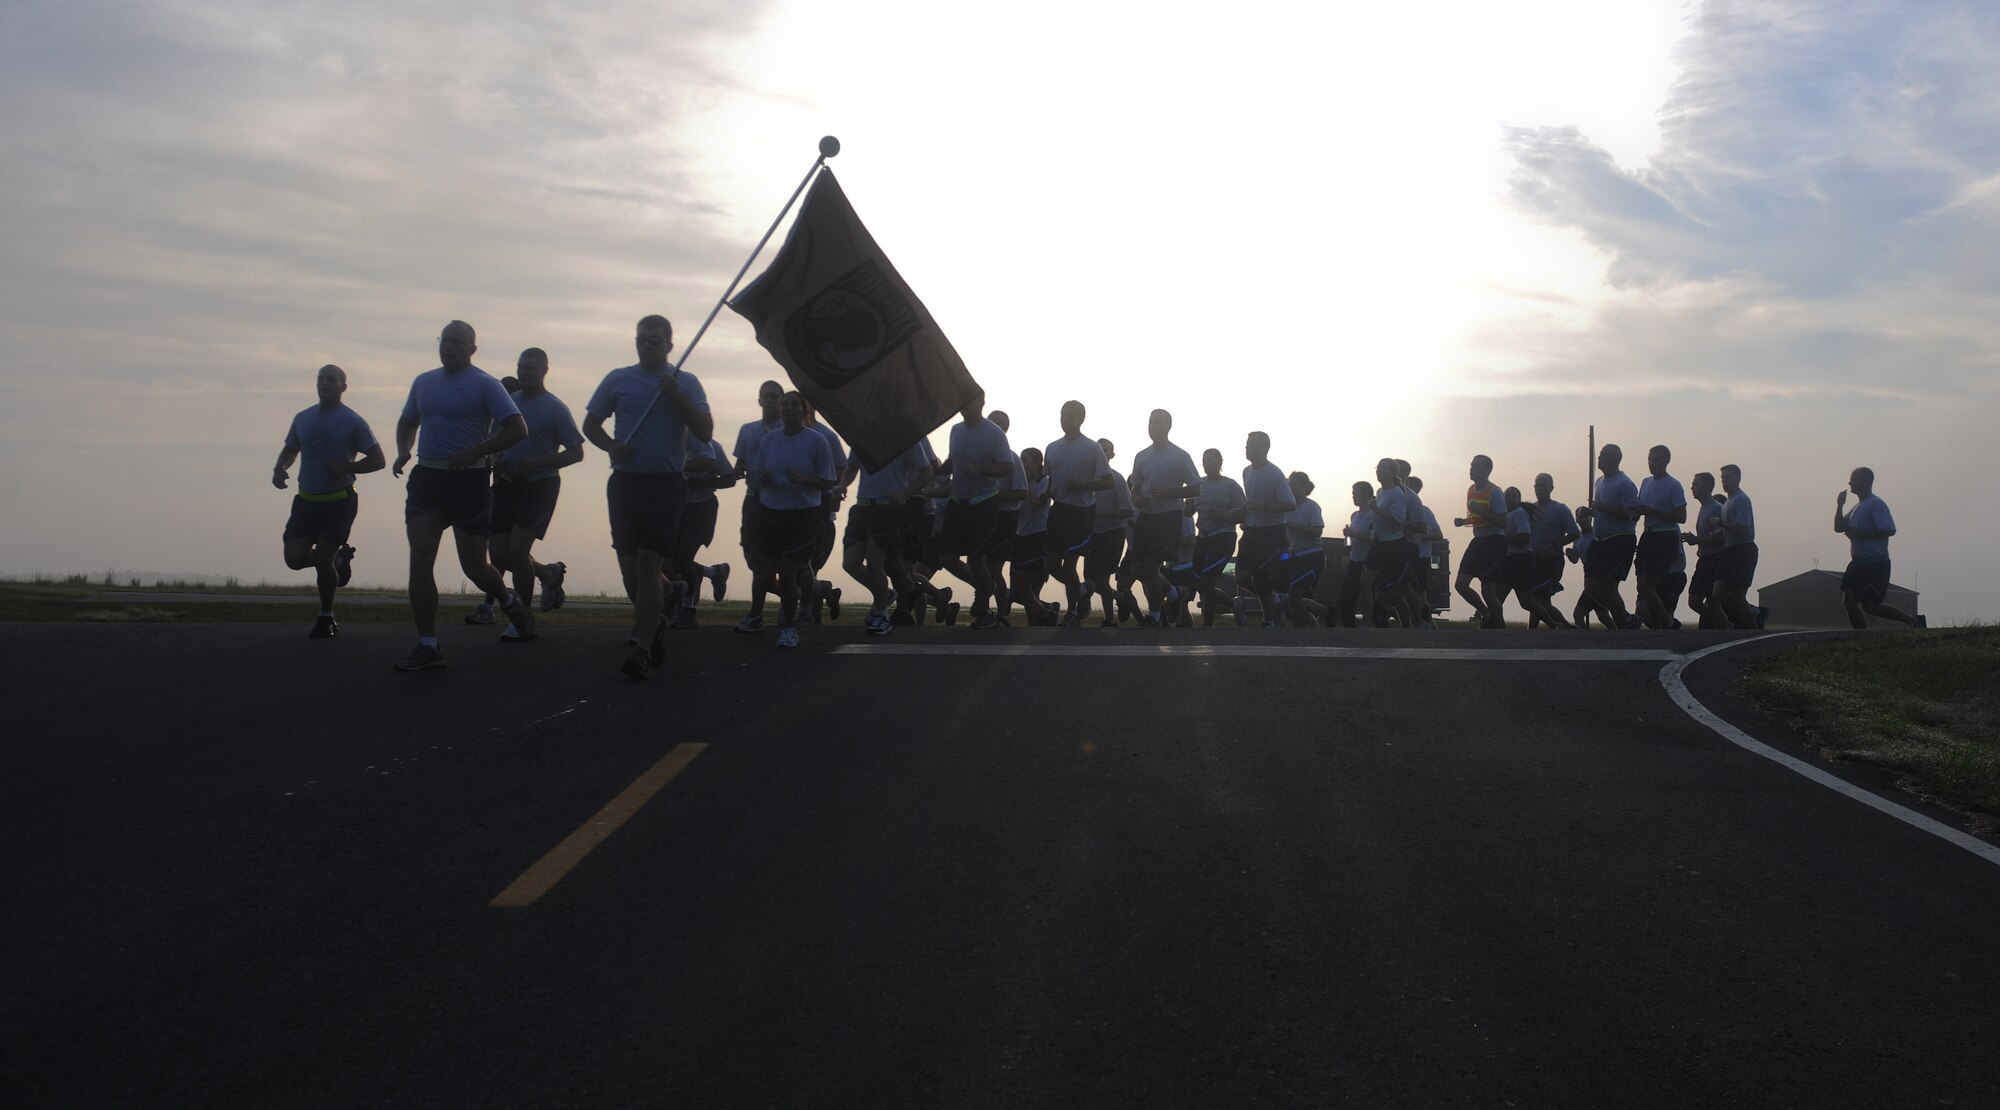 Moody Airmen take part in the 4th annual Tiger-thon run at Moody Air Force Base, Ga., Sept. 21, 2012. Individuals from various organizations on base joined together to participate in the 23 mile run in honor of all prisoners of war and missing in action, past and present. (U.S. Air Force photo by Airman 1st Class Olivia Dominique/Released)